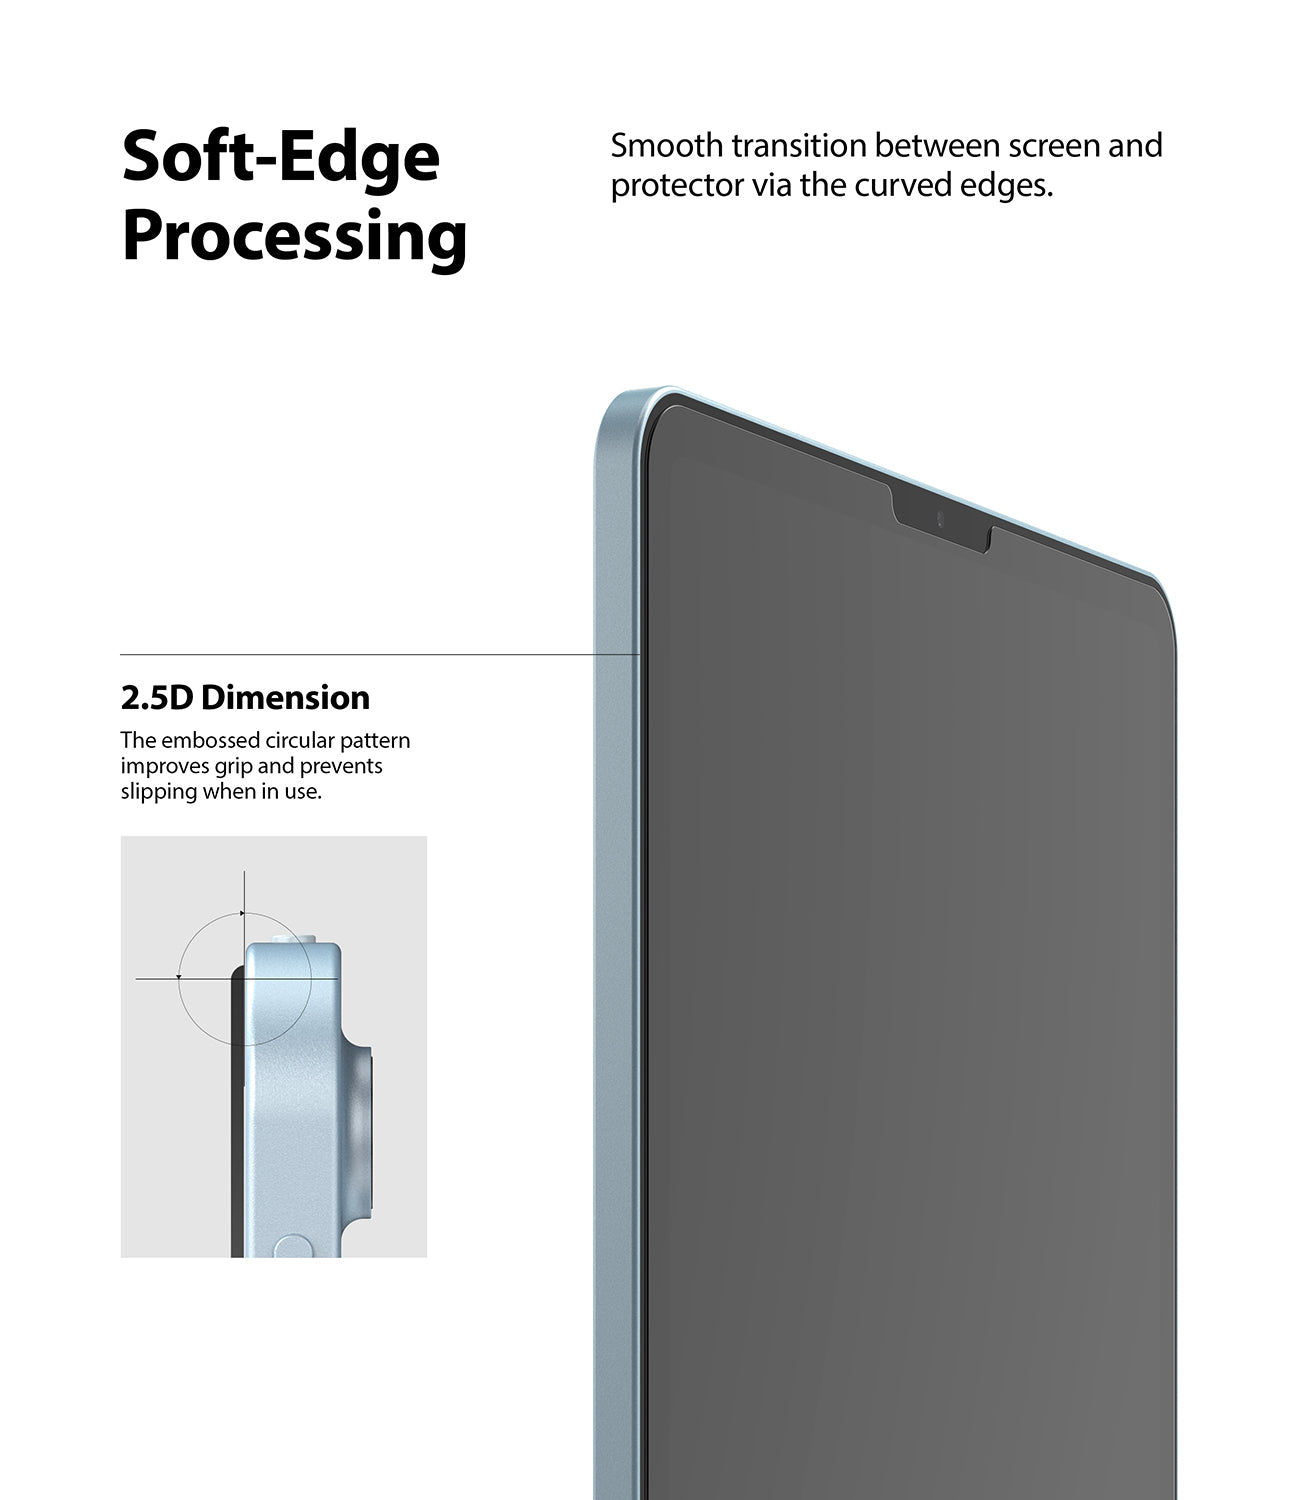 smooth transition between screen and protector via the curved edges